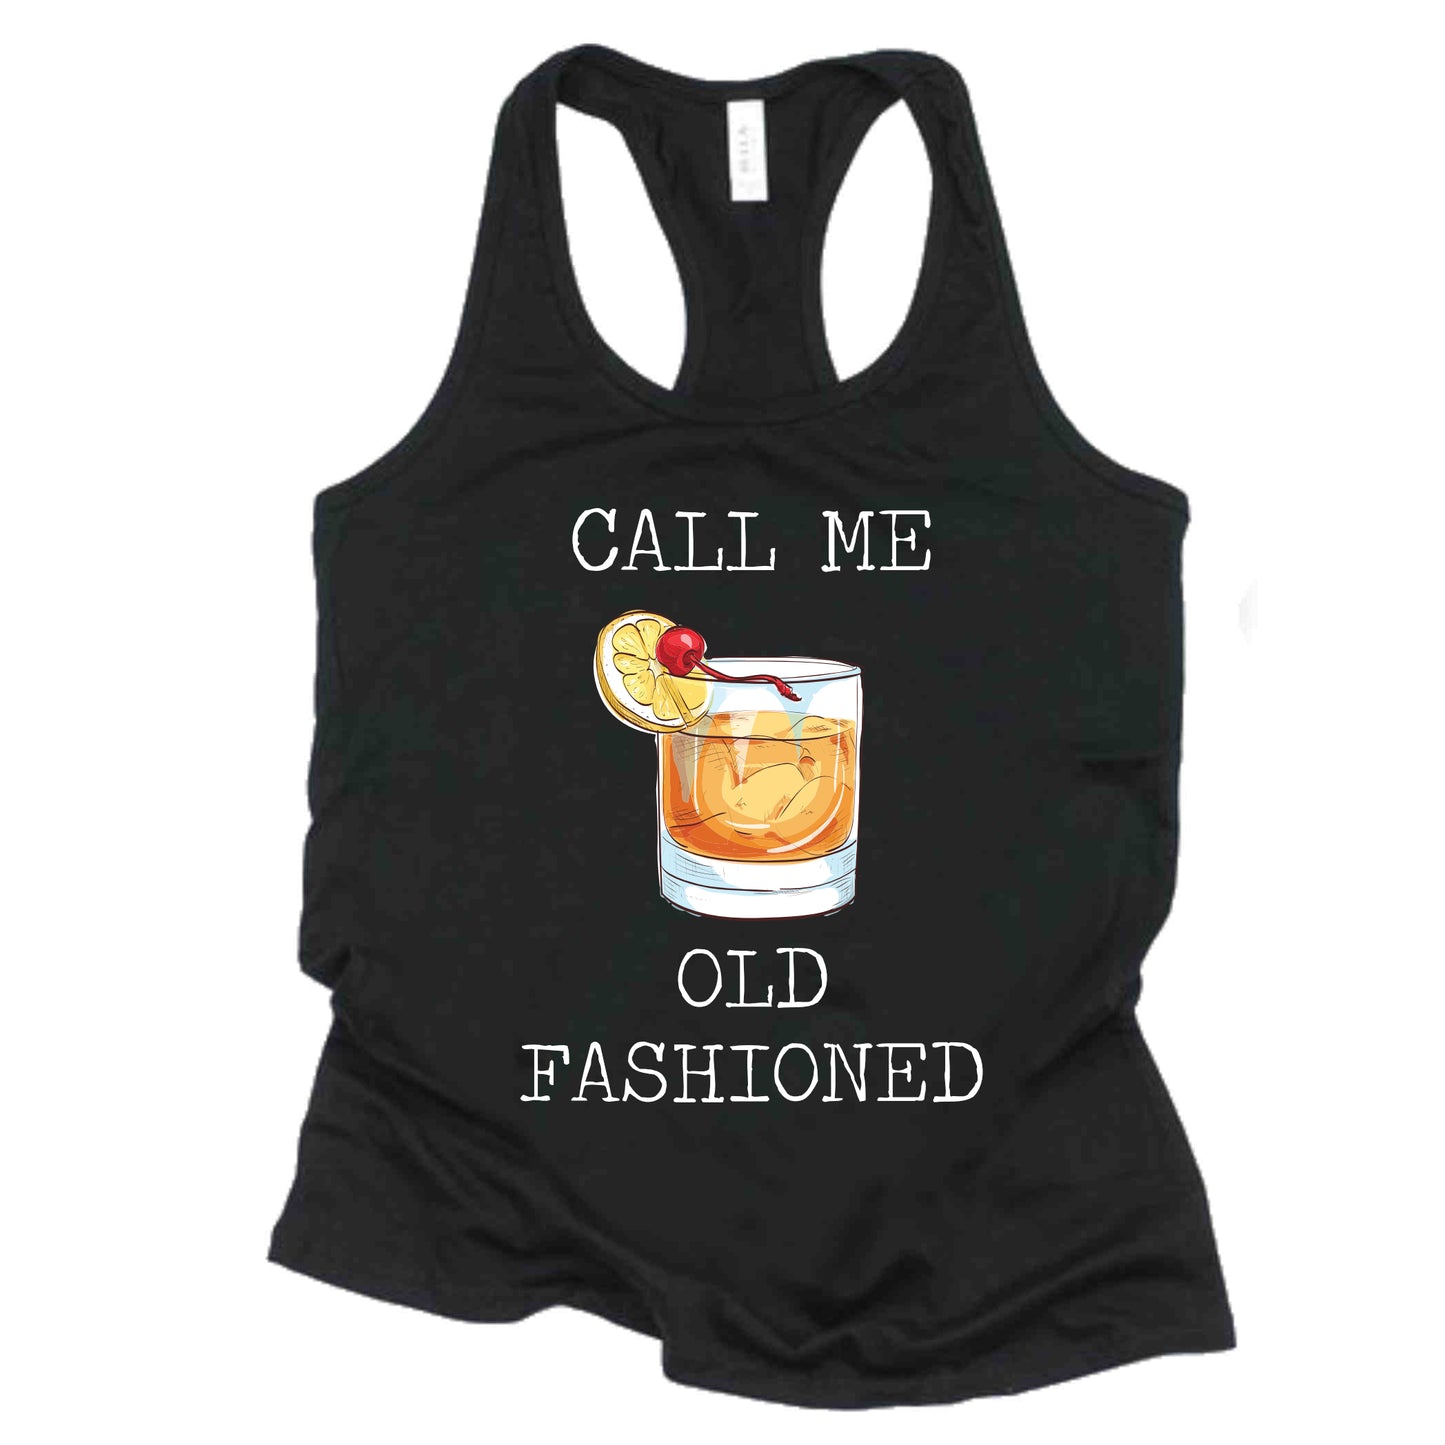 Be Old Fashioned this Summer  . . .